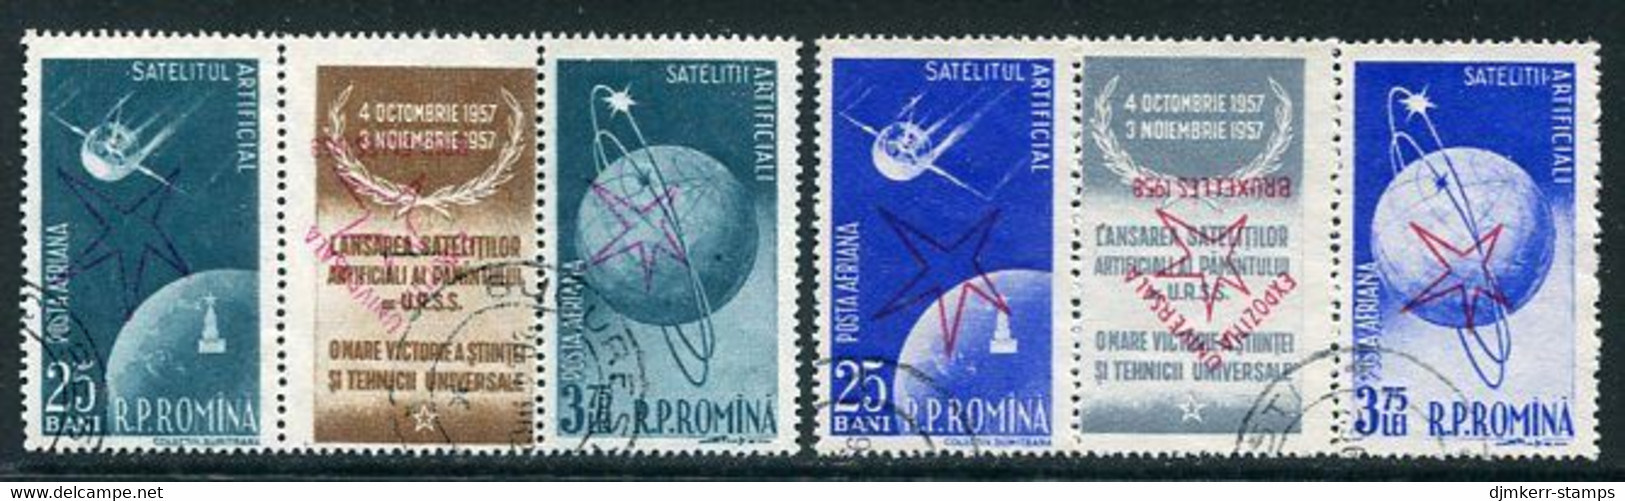 ROMANIA 1958 Brussels Exhibition Inverted Overprint Strips Used.  Michel 1717-20 K - Used Stamps